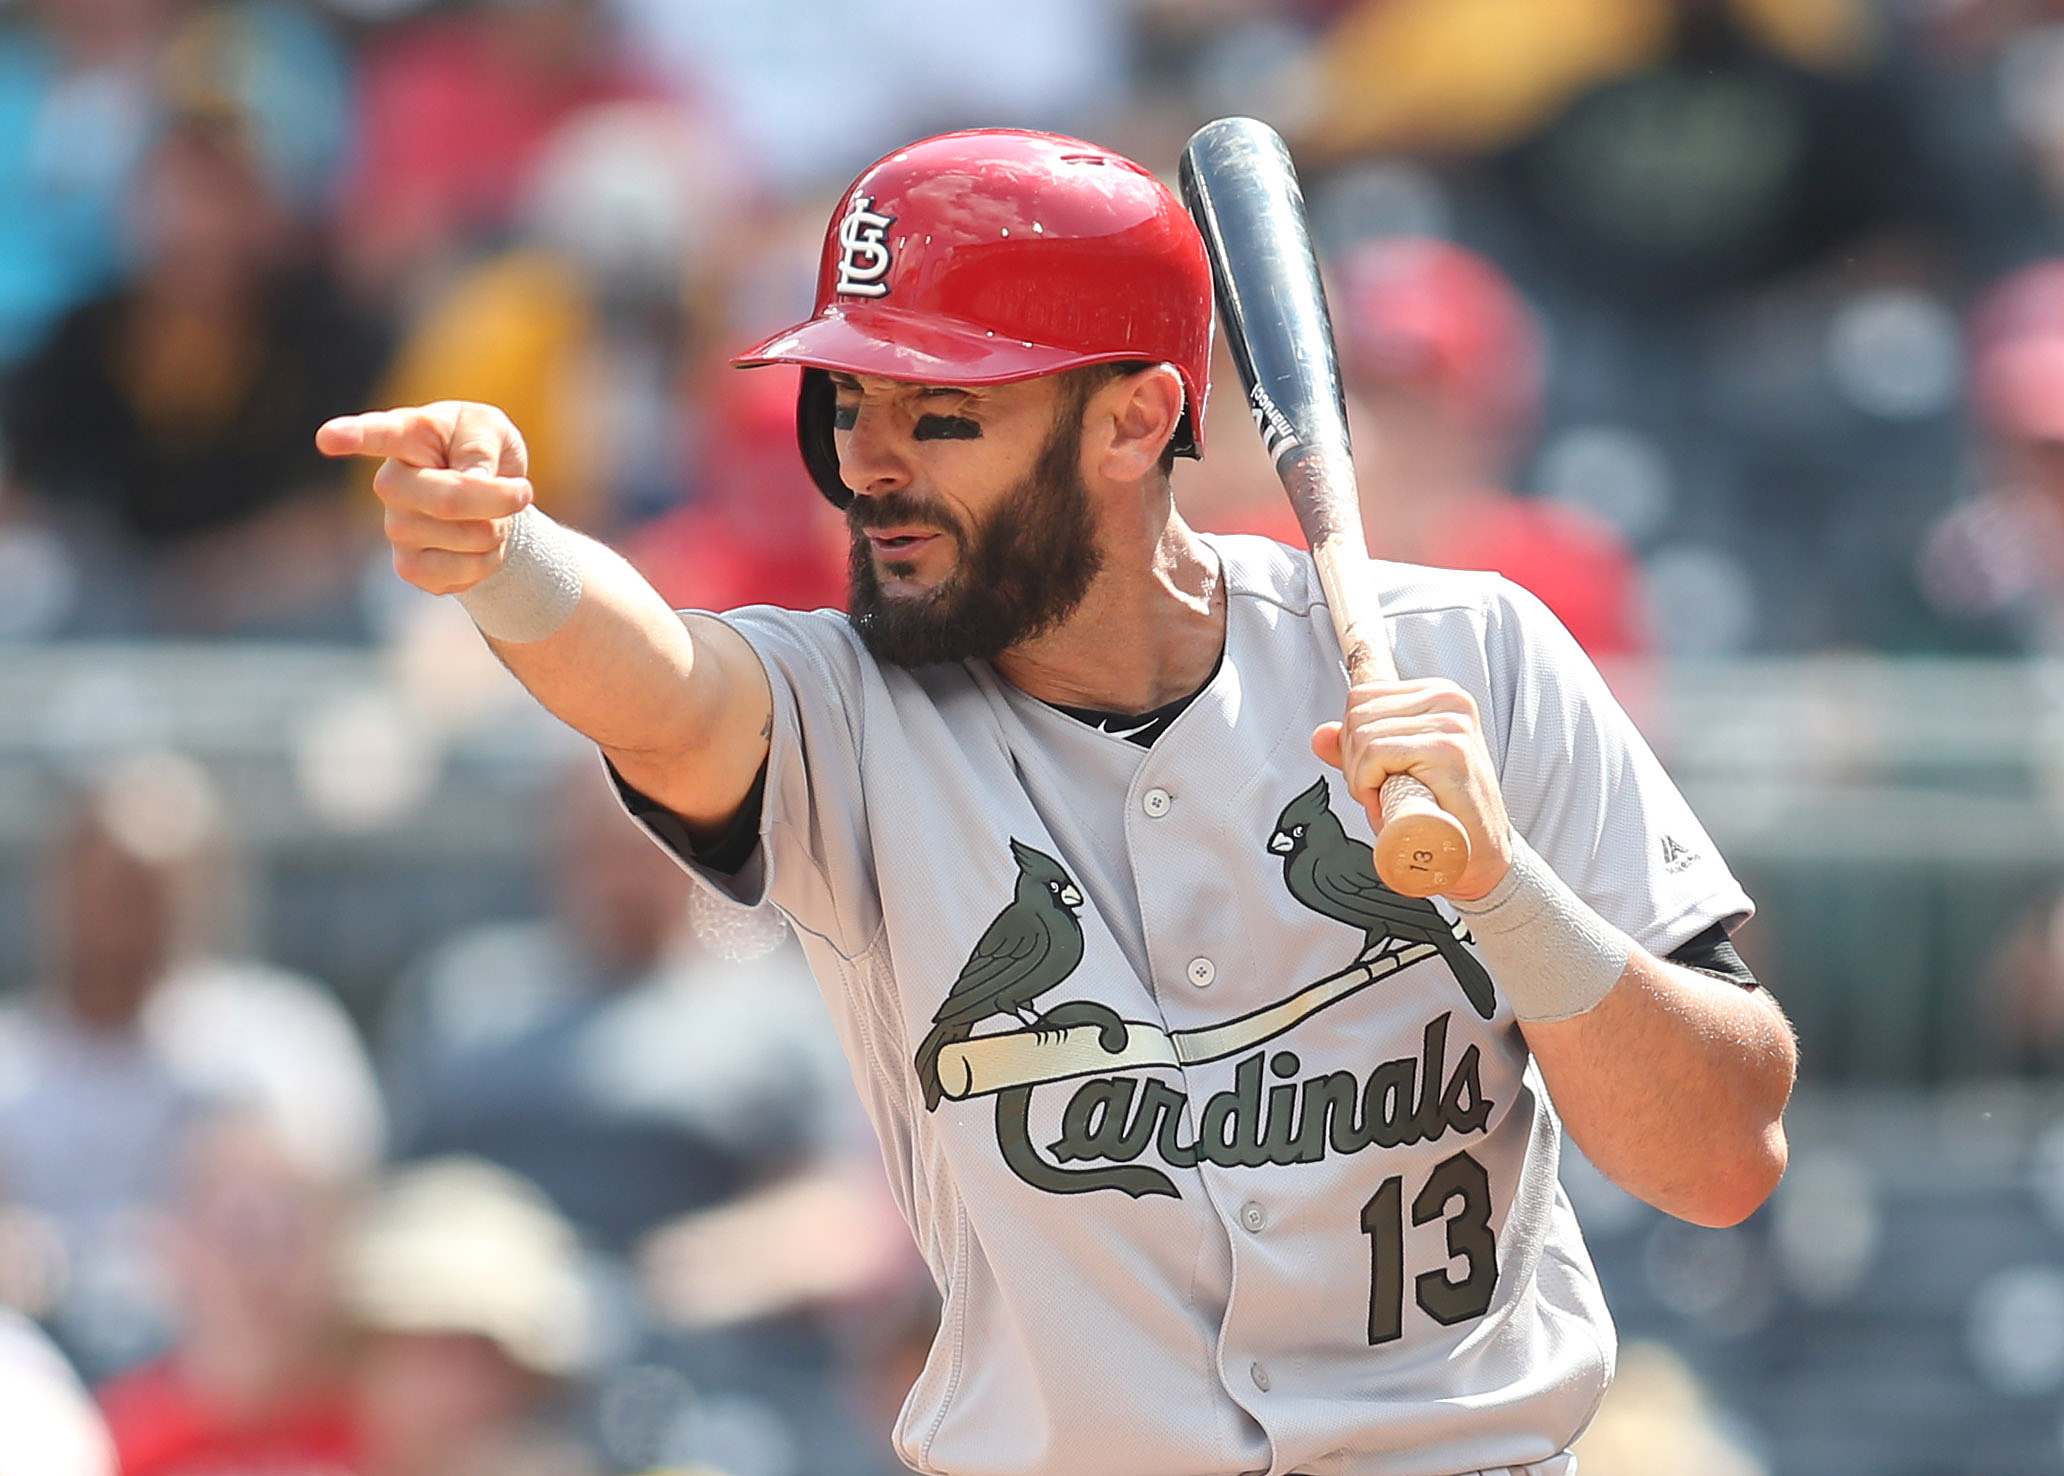 Cardinals New-Look Lineup Paying Dividends - 590 The Fan